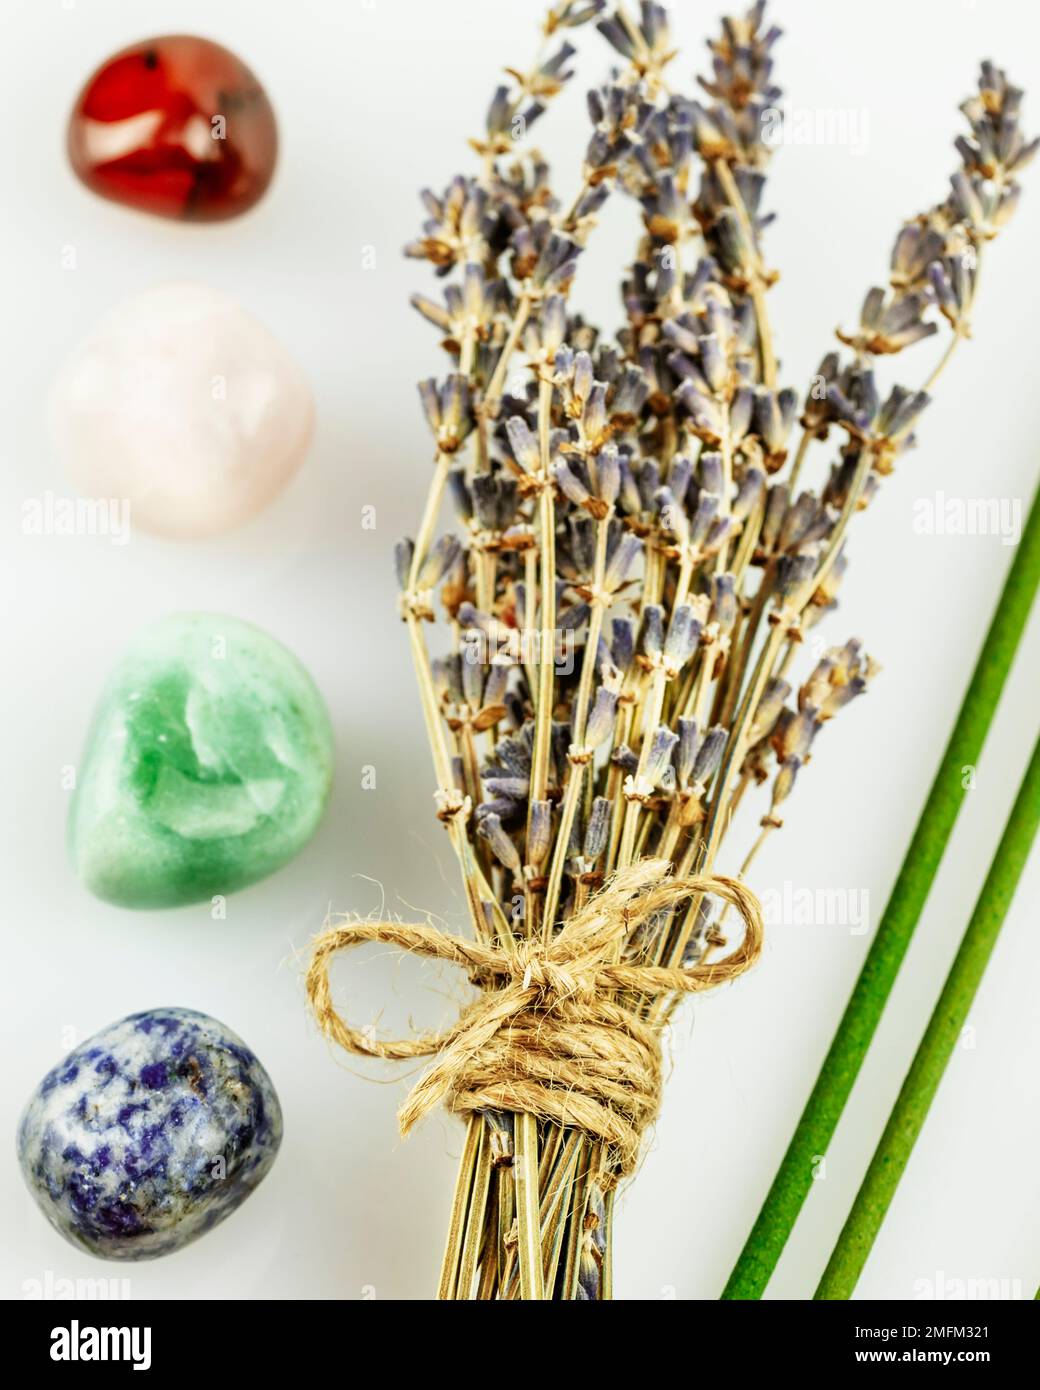 Recovering, energy healing composition with lavender flowers, aroma sticks and chakra stones on white background. Concept of relaxing, self care, medi Stock Photo